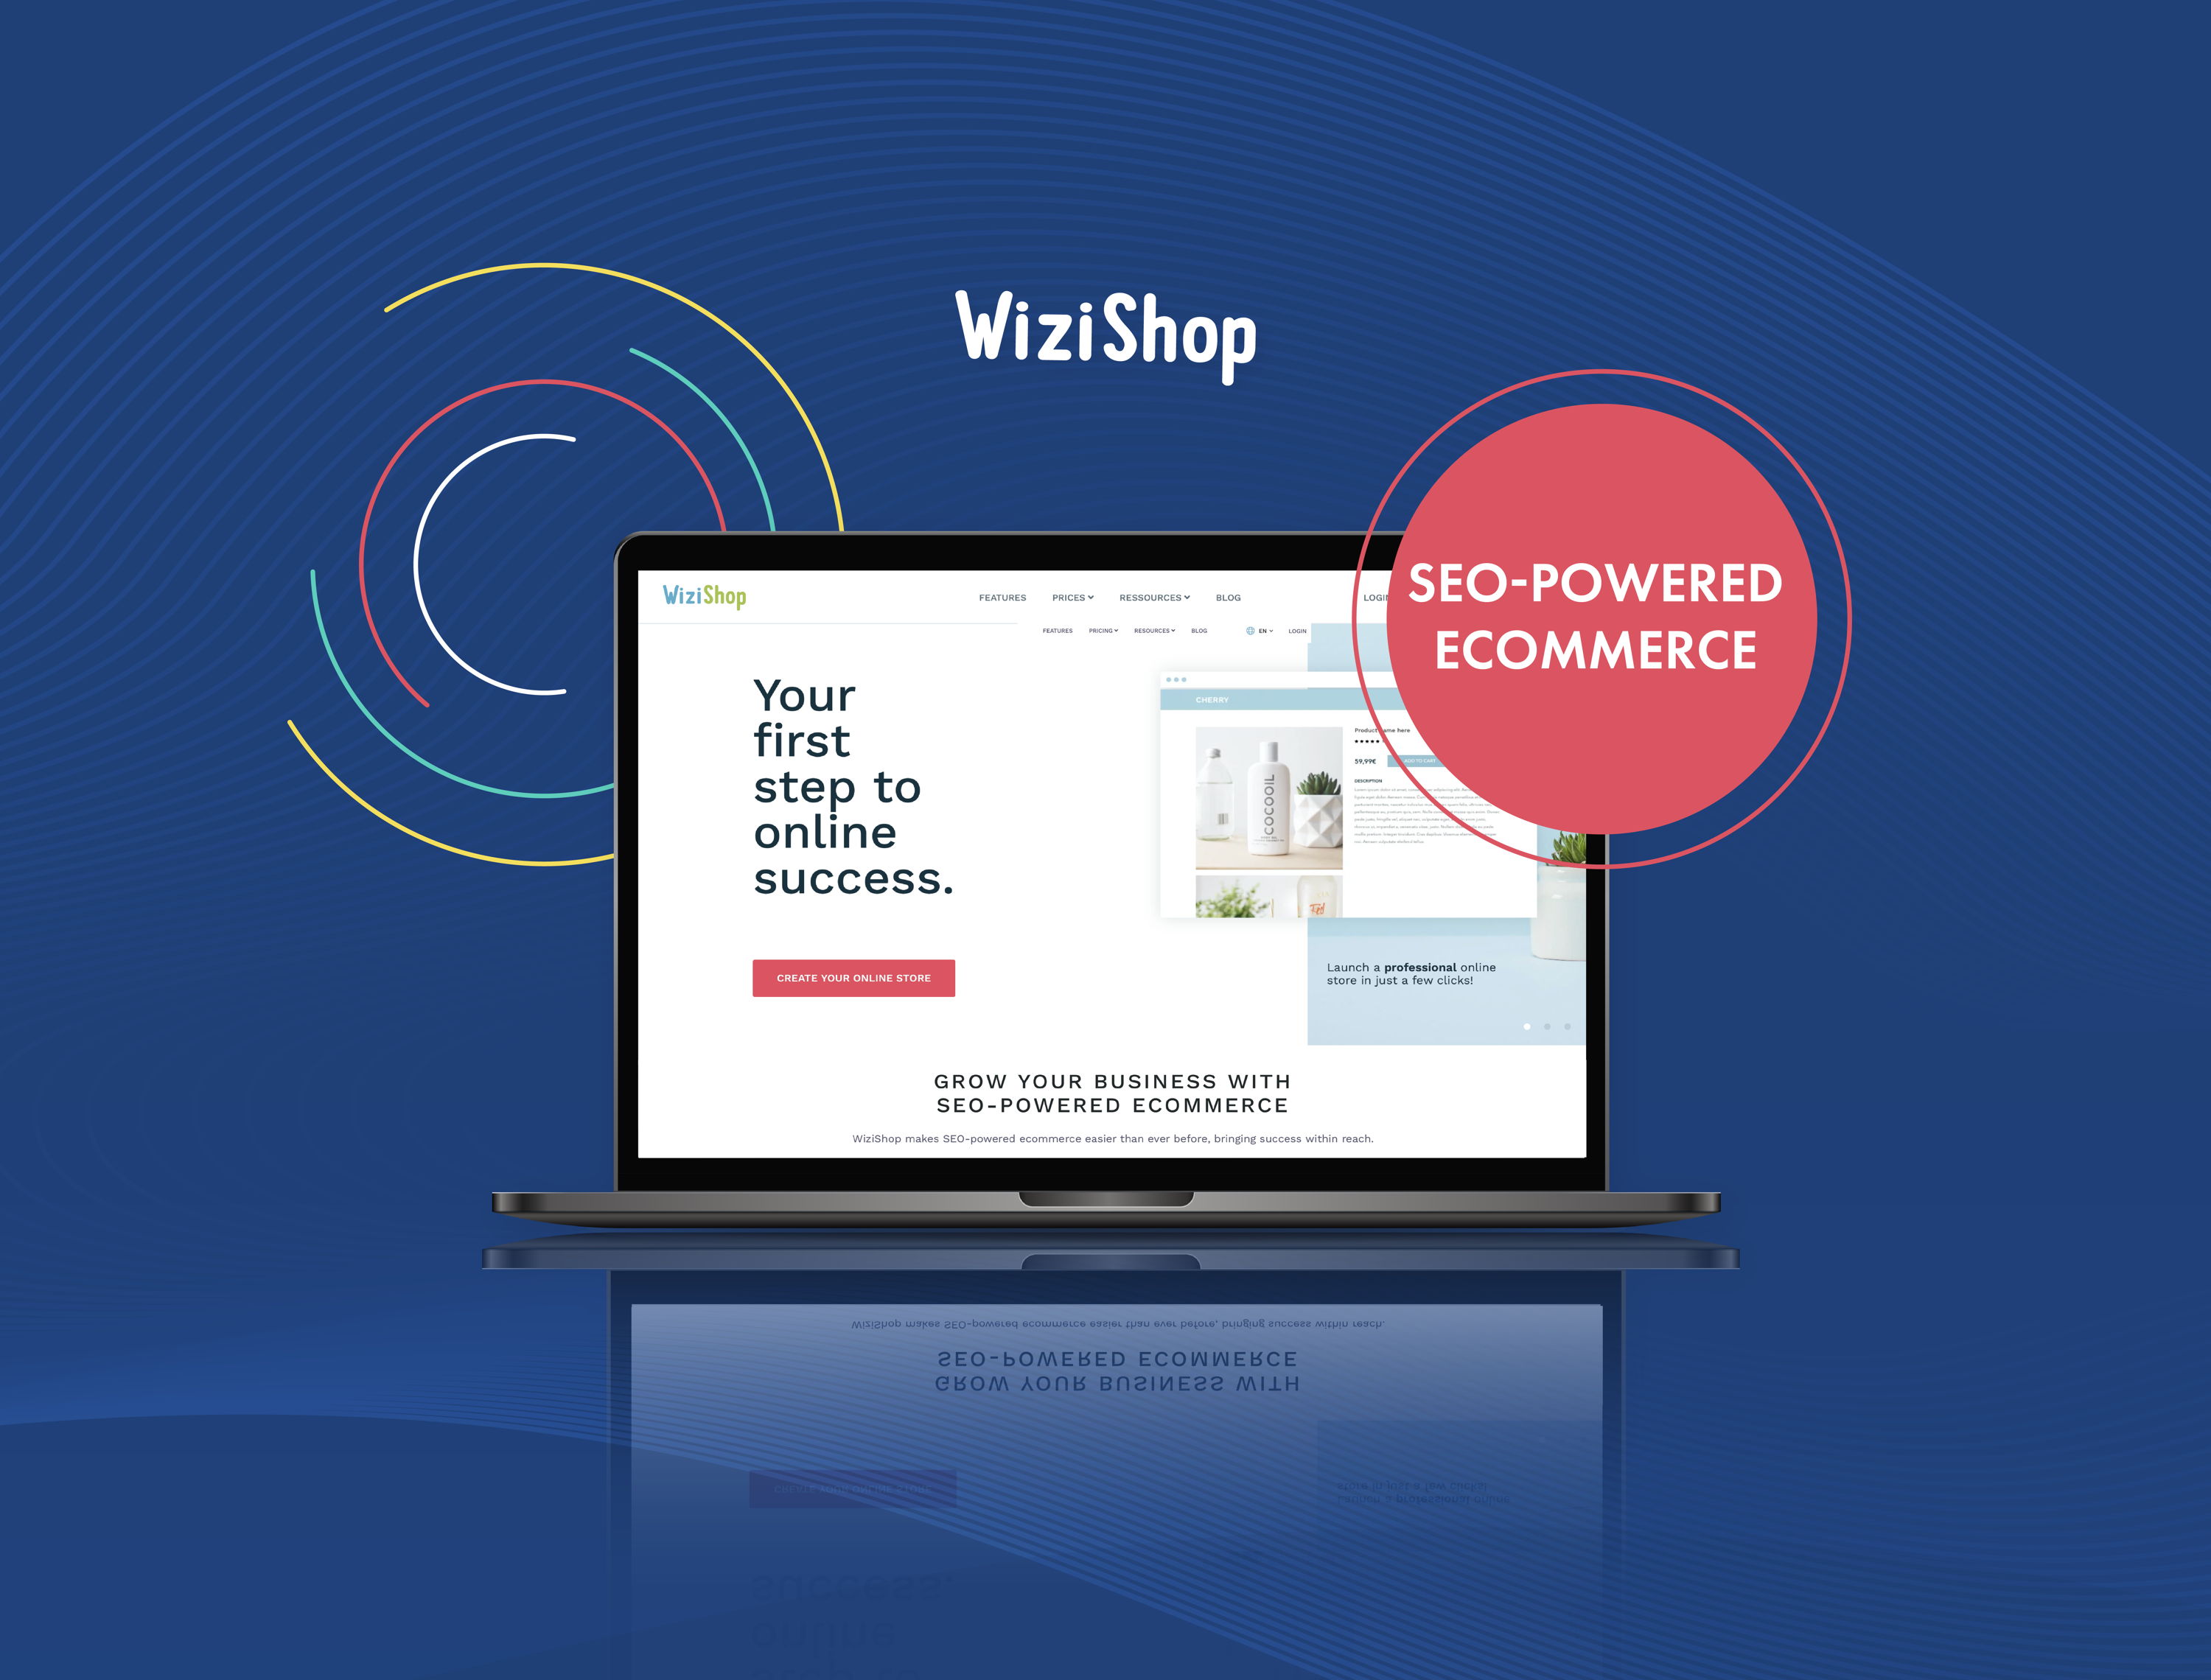 WiziShop: a new no-code ecommerce solution has launched